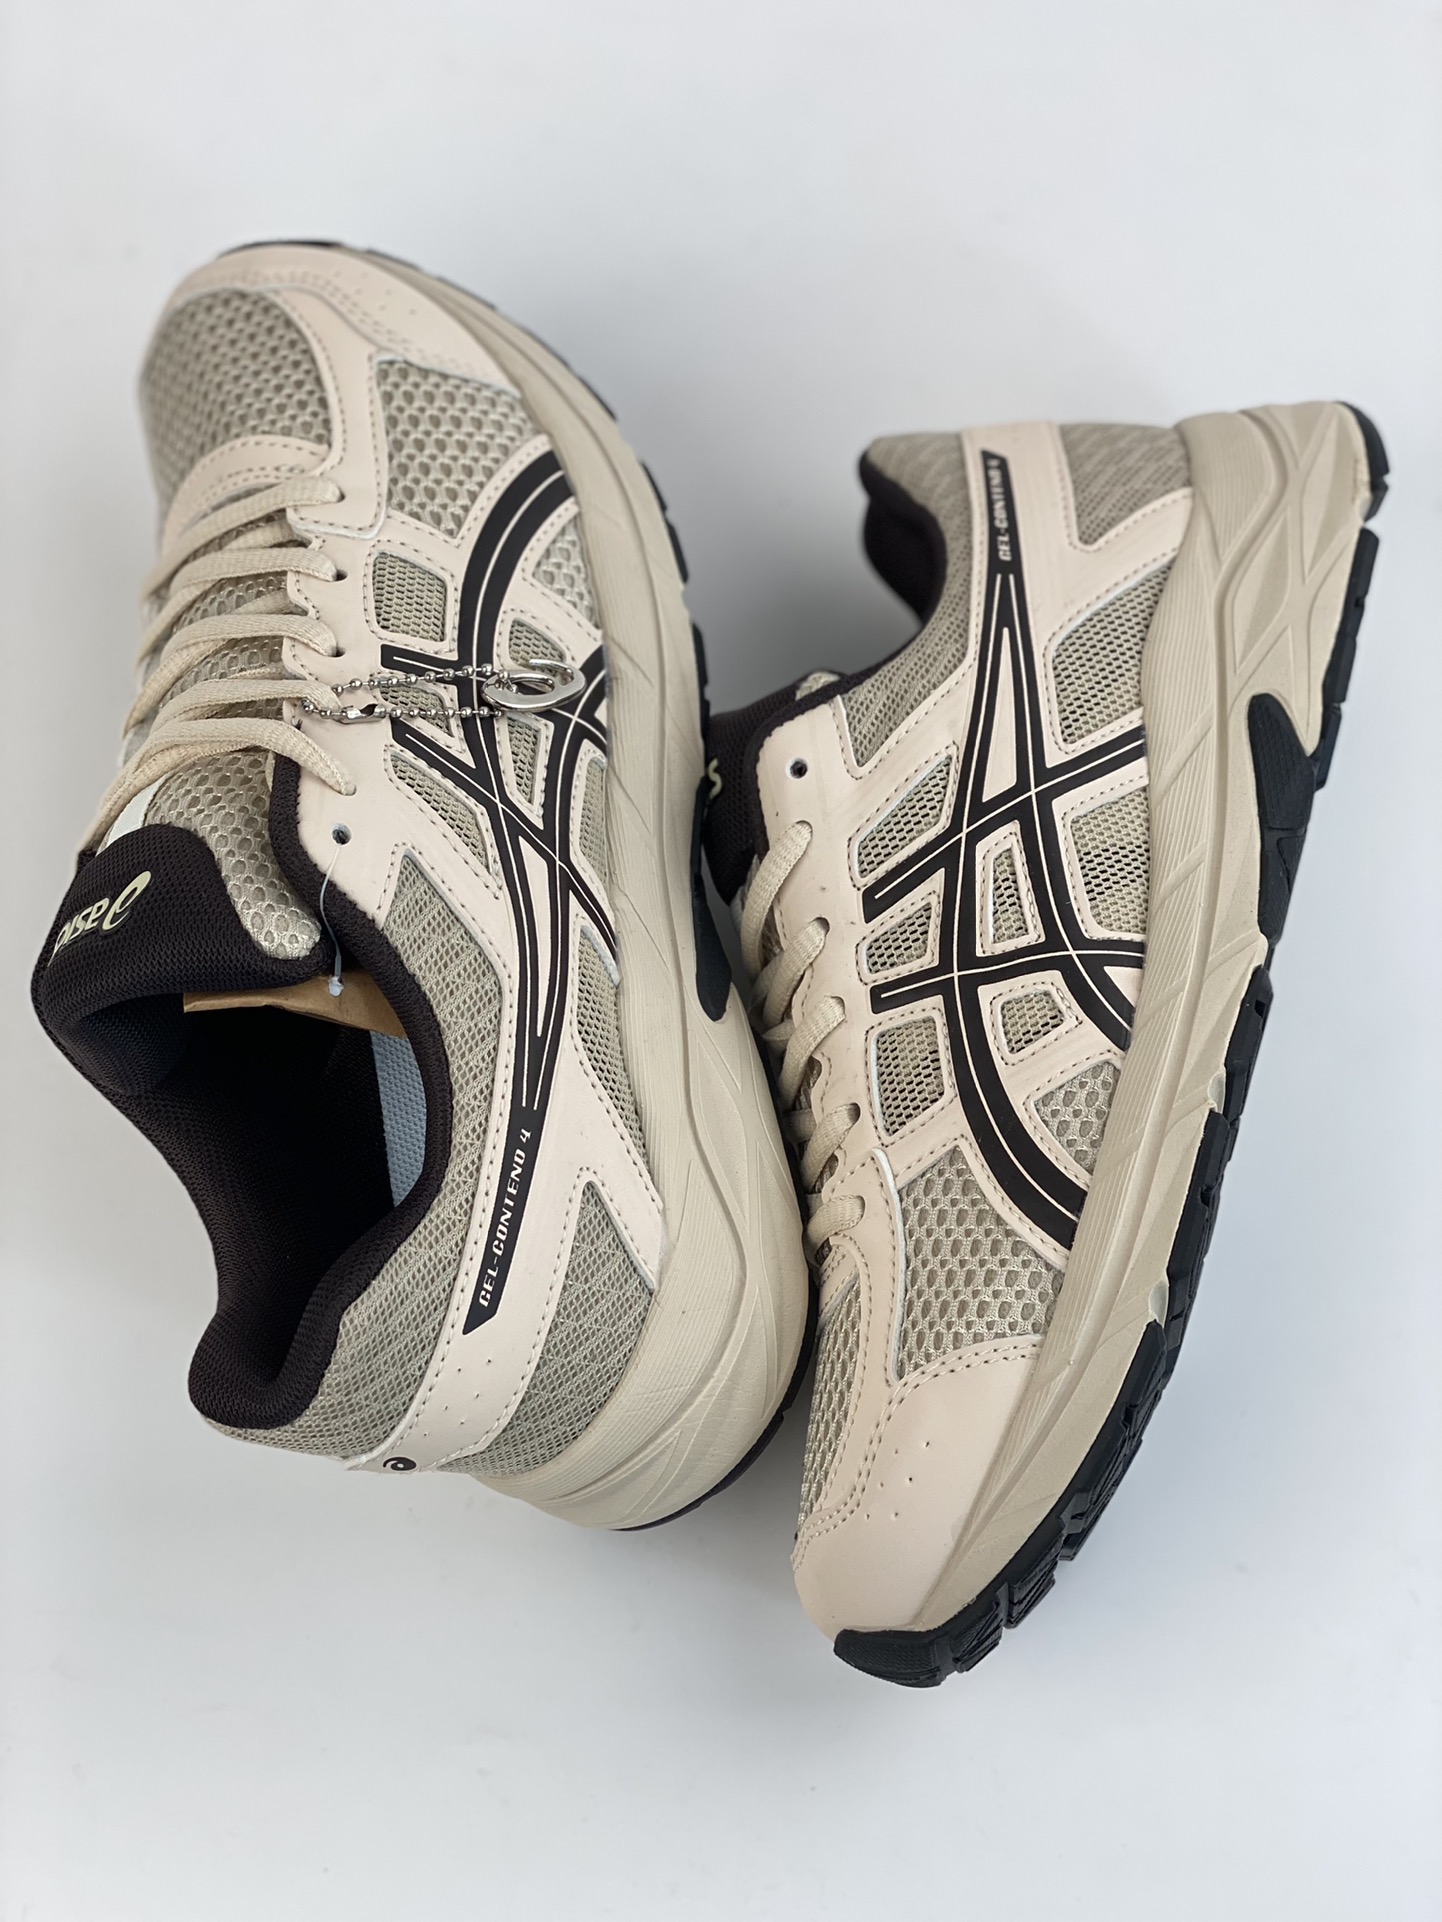 Asics Gel-Contend 4 gray shock-absorbing and non-slip sports running shoes T8D4Q-030